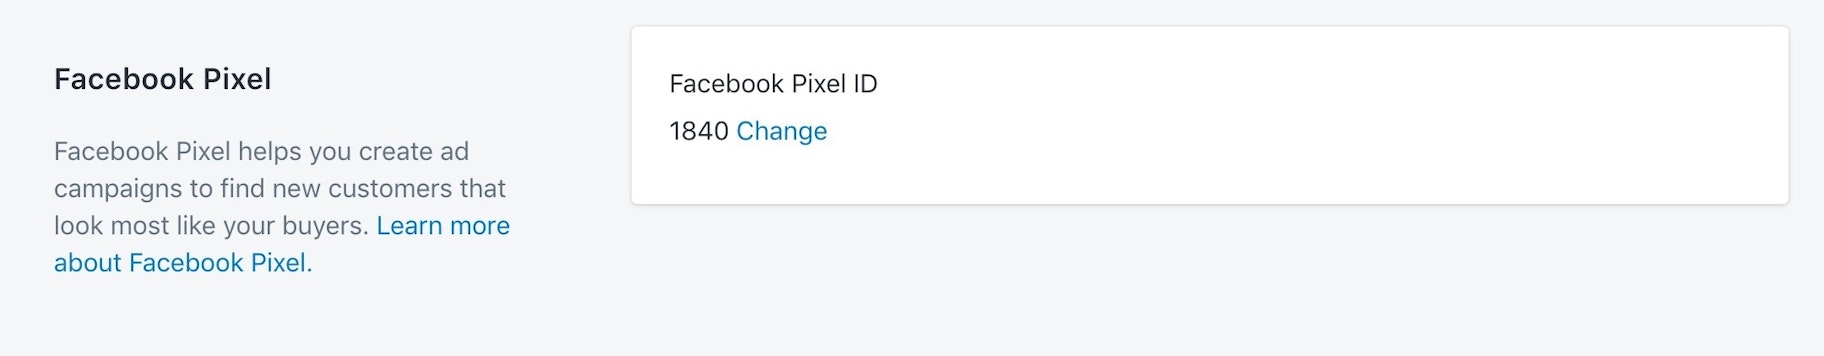 Inserting Facebook pixel ID in Shopify